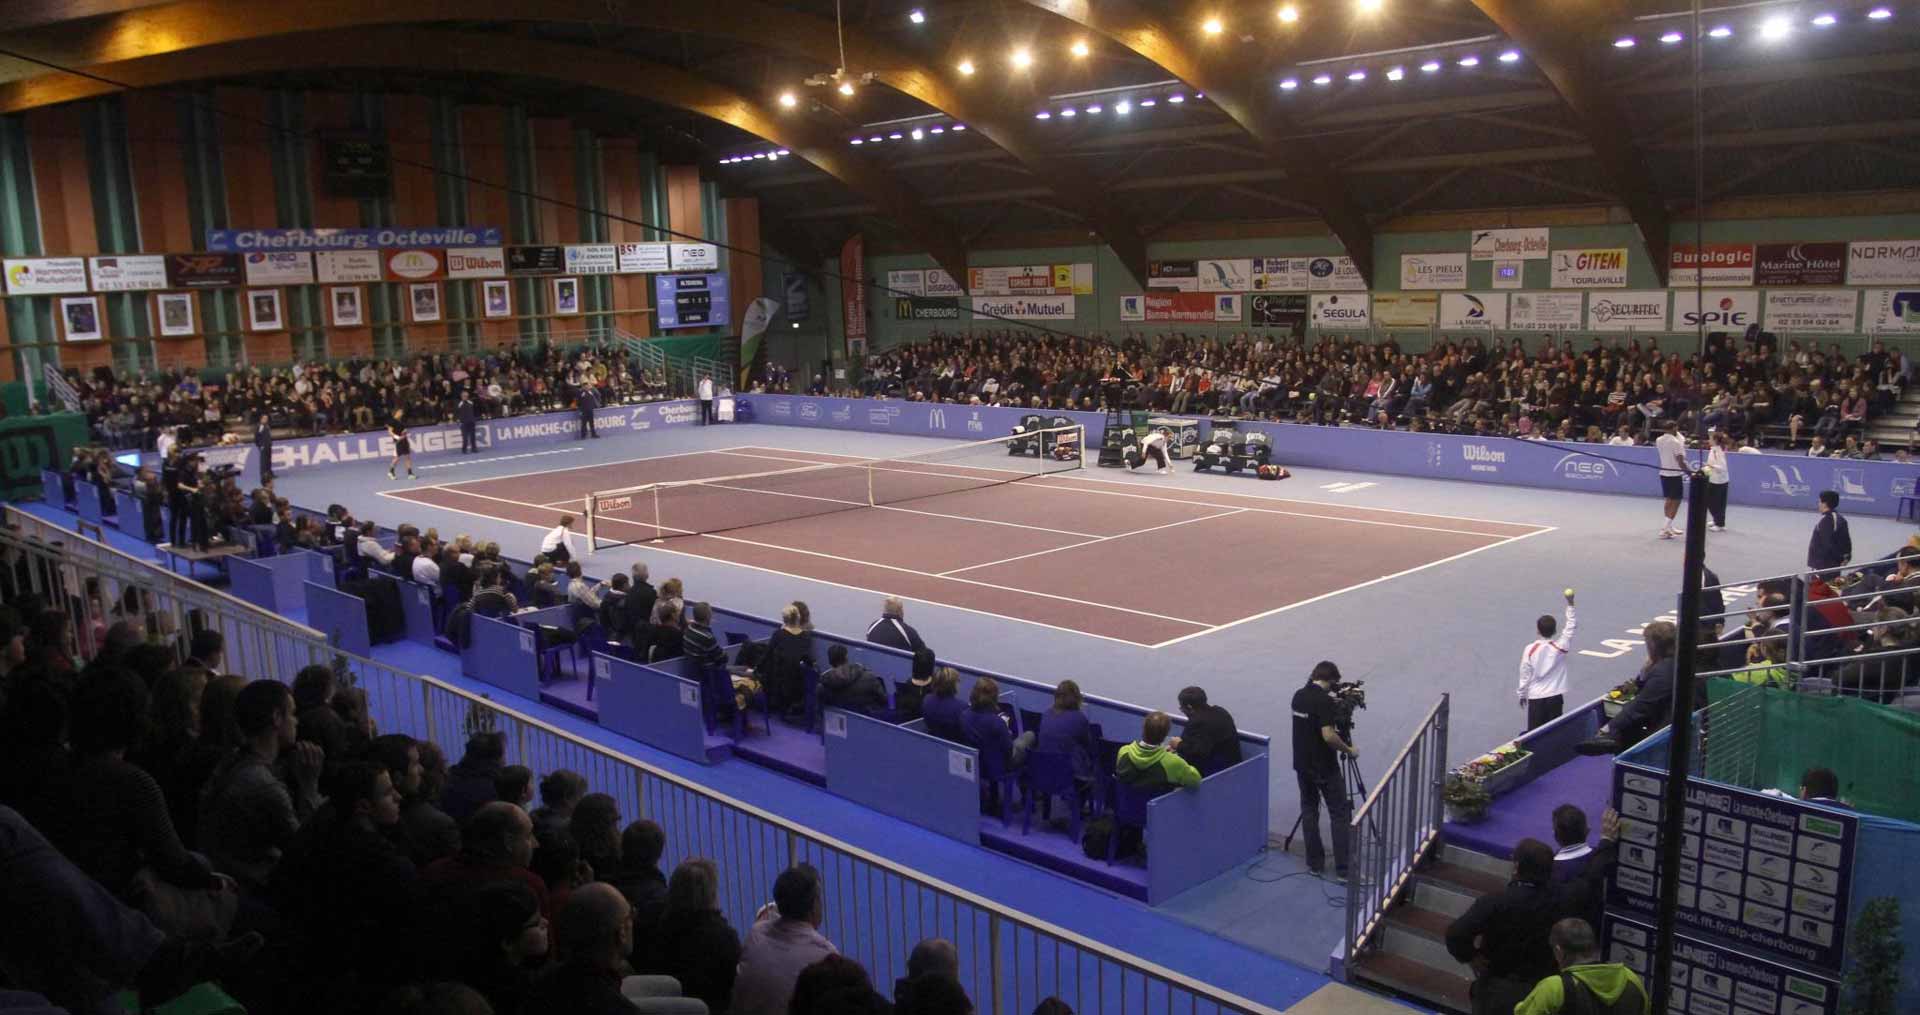 Cherbourg Overview ATP Tour Tennis